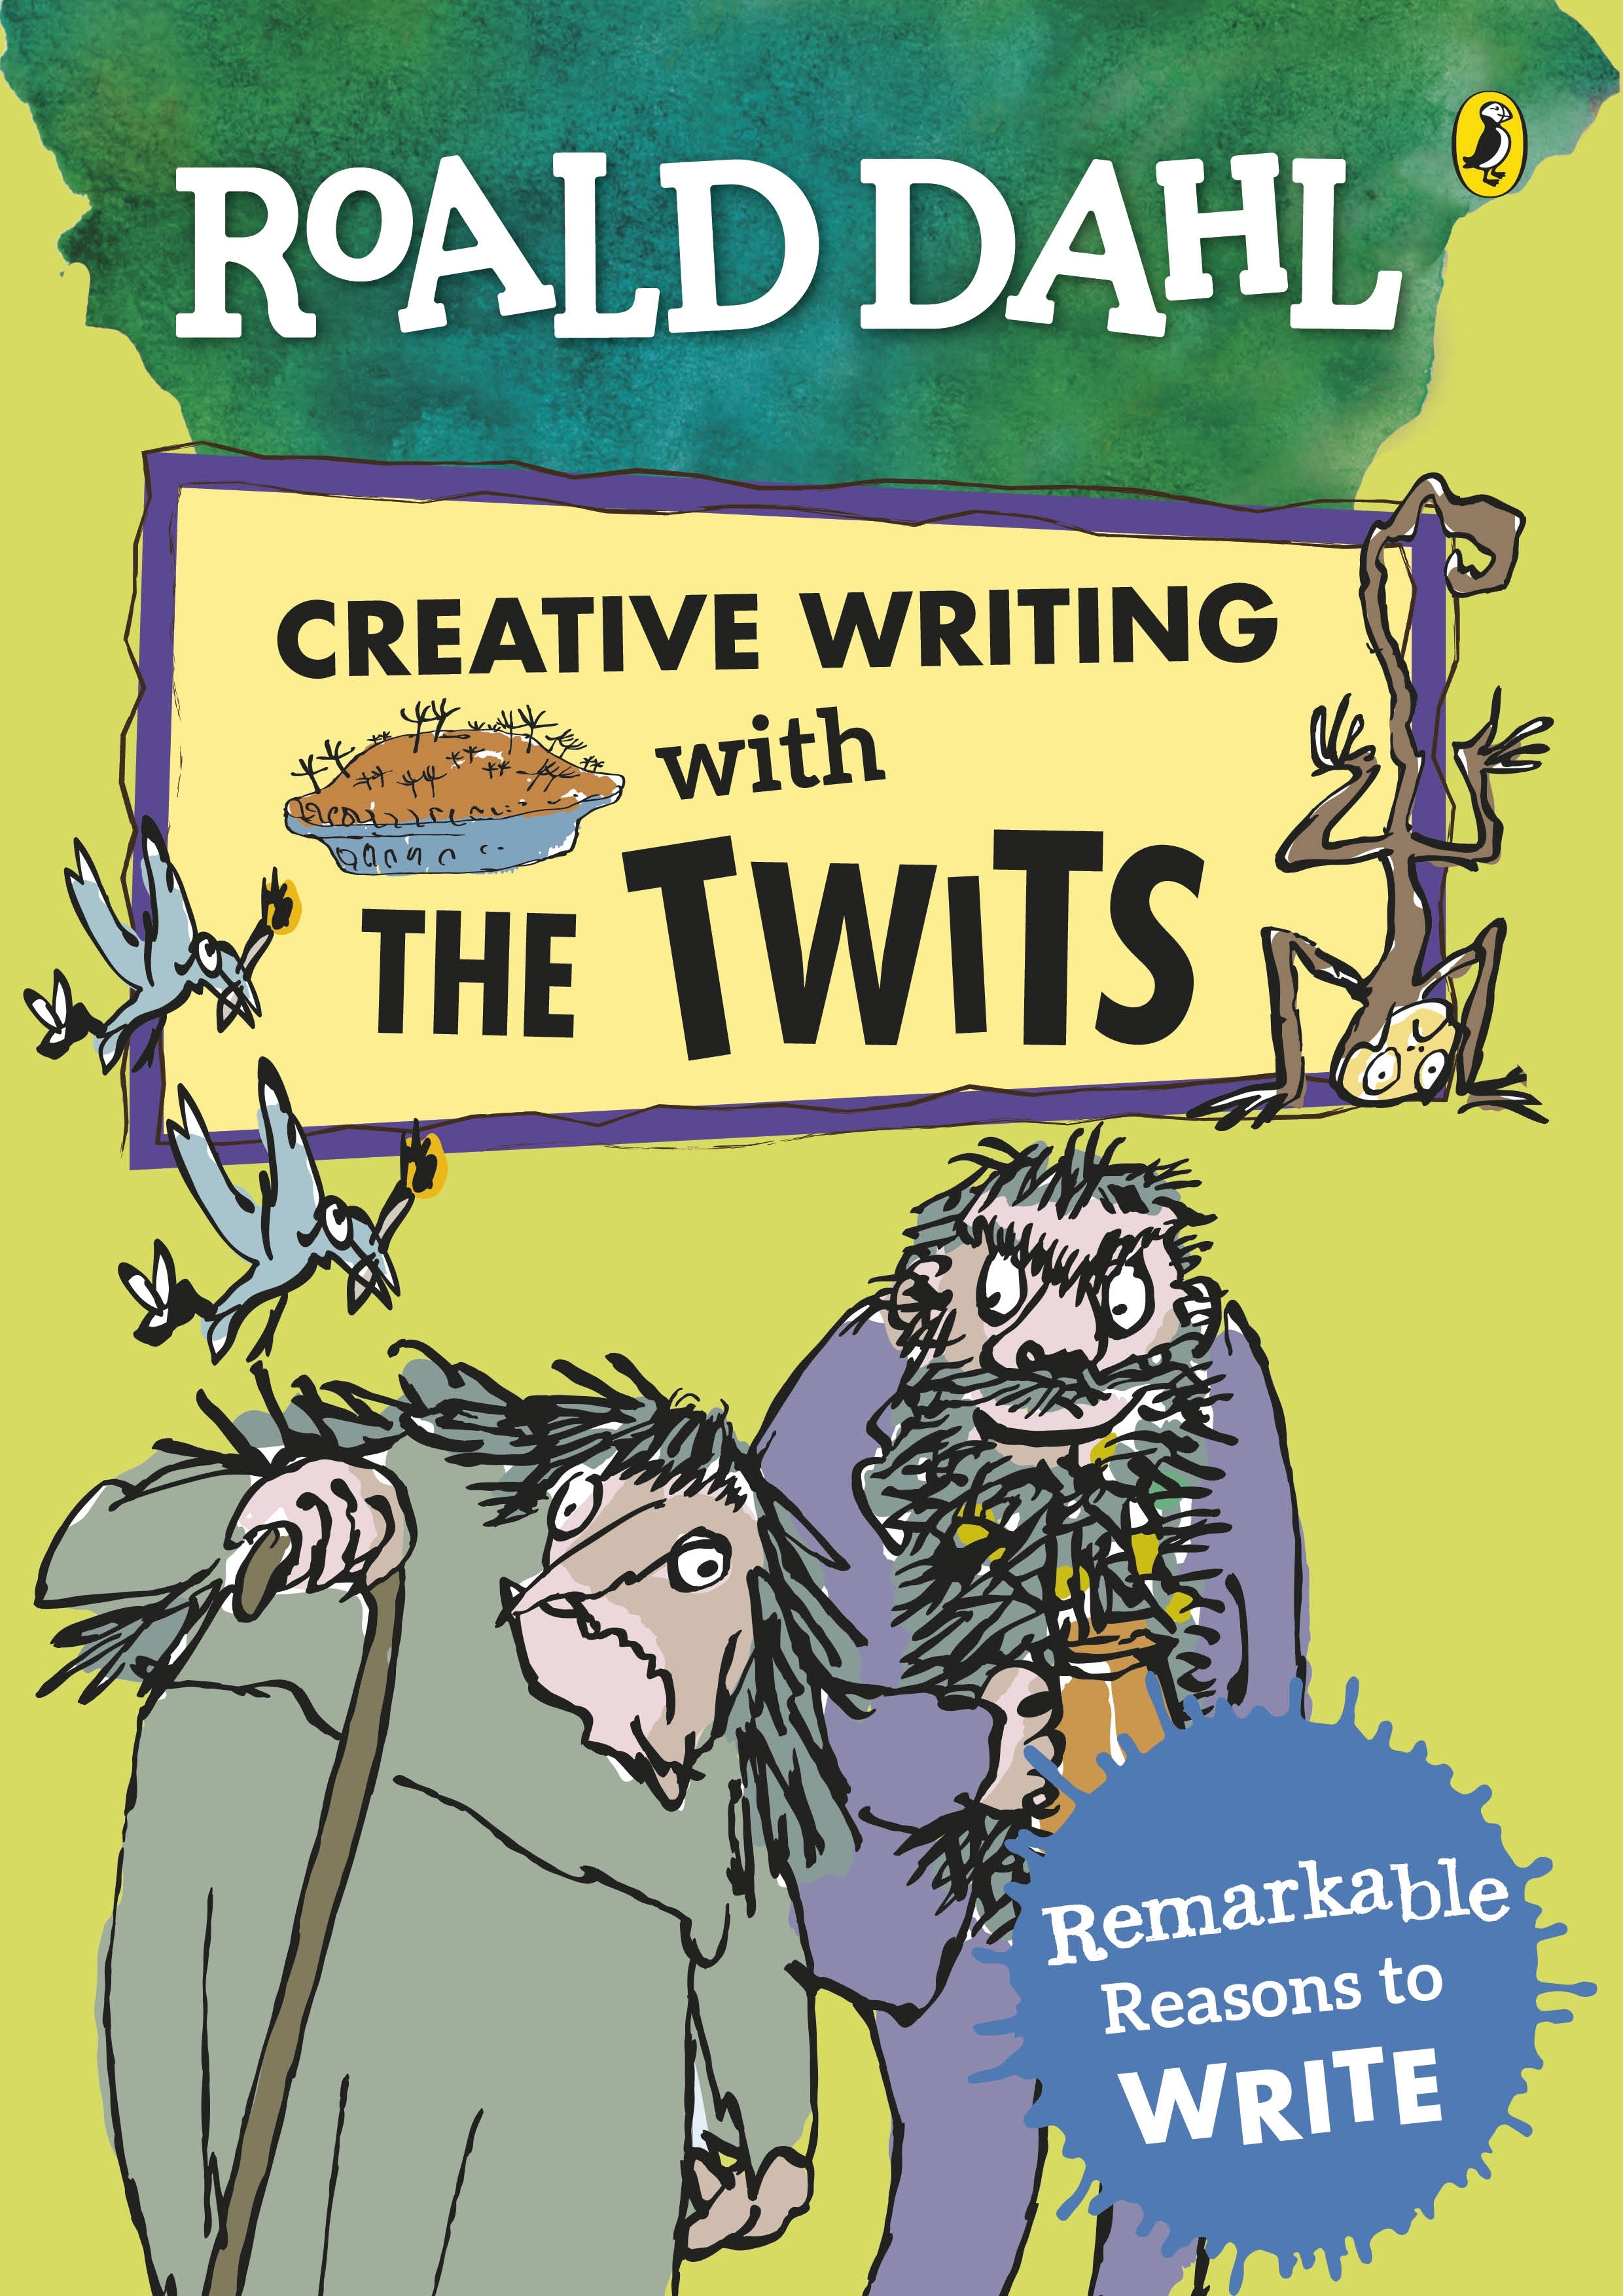 Roald Dahl Creative Writing with The Twits: Remarkable Reasons to